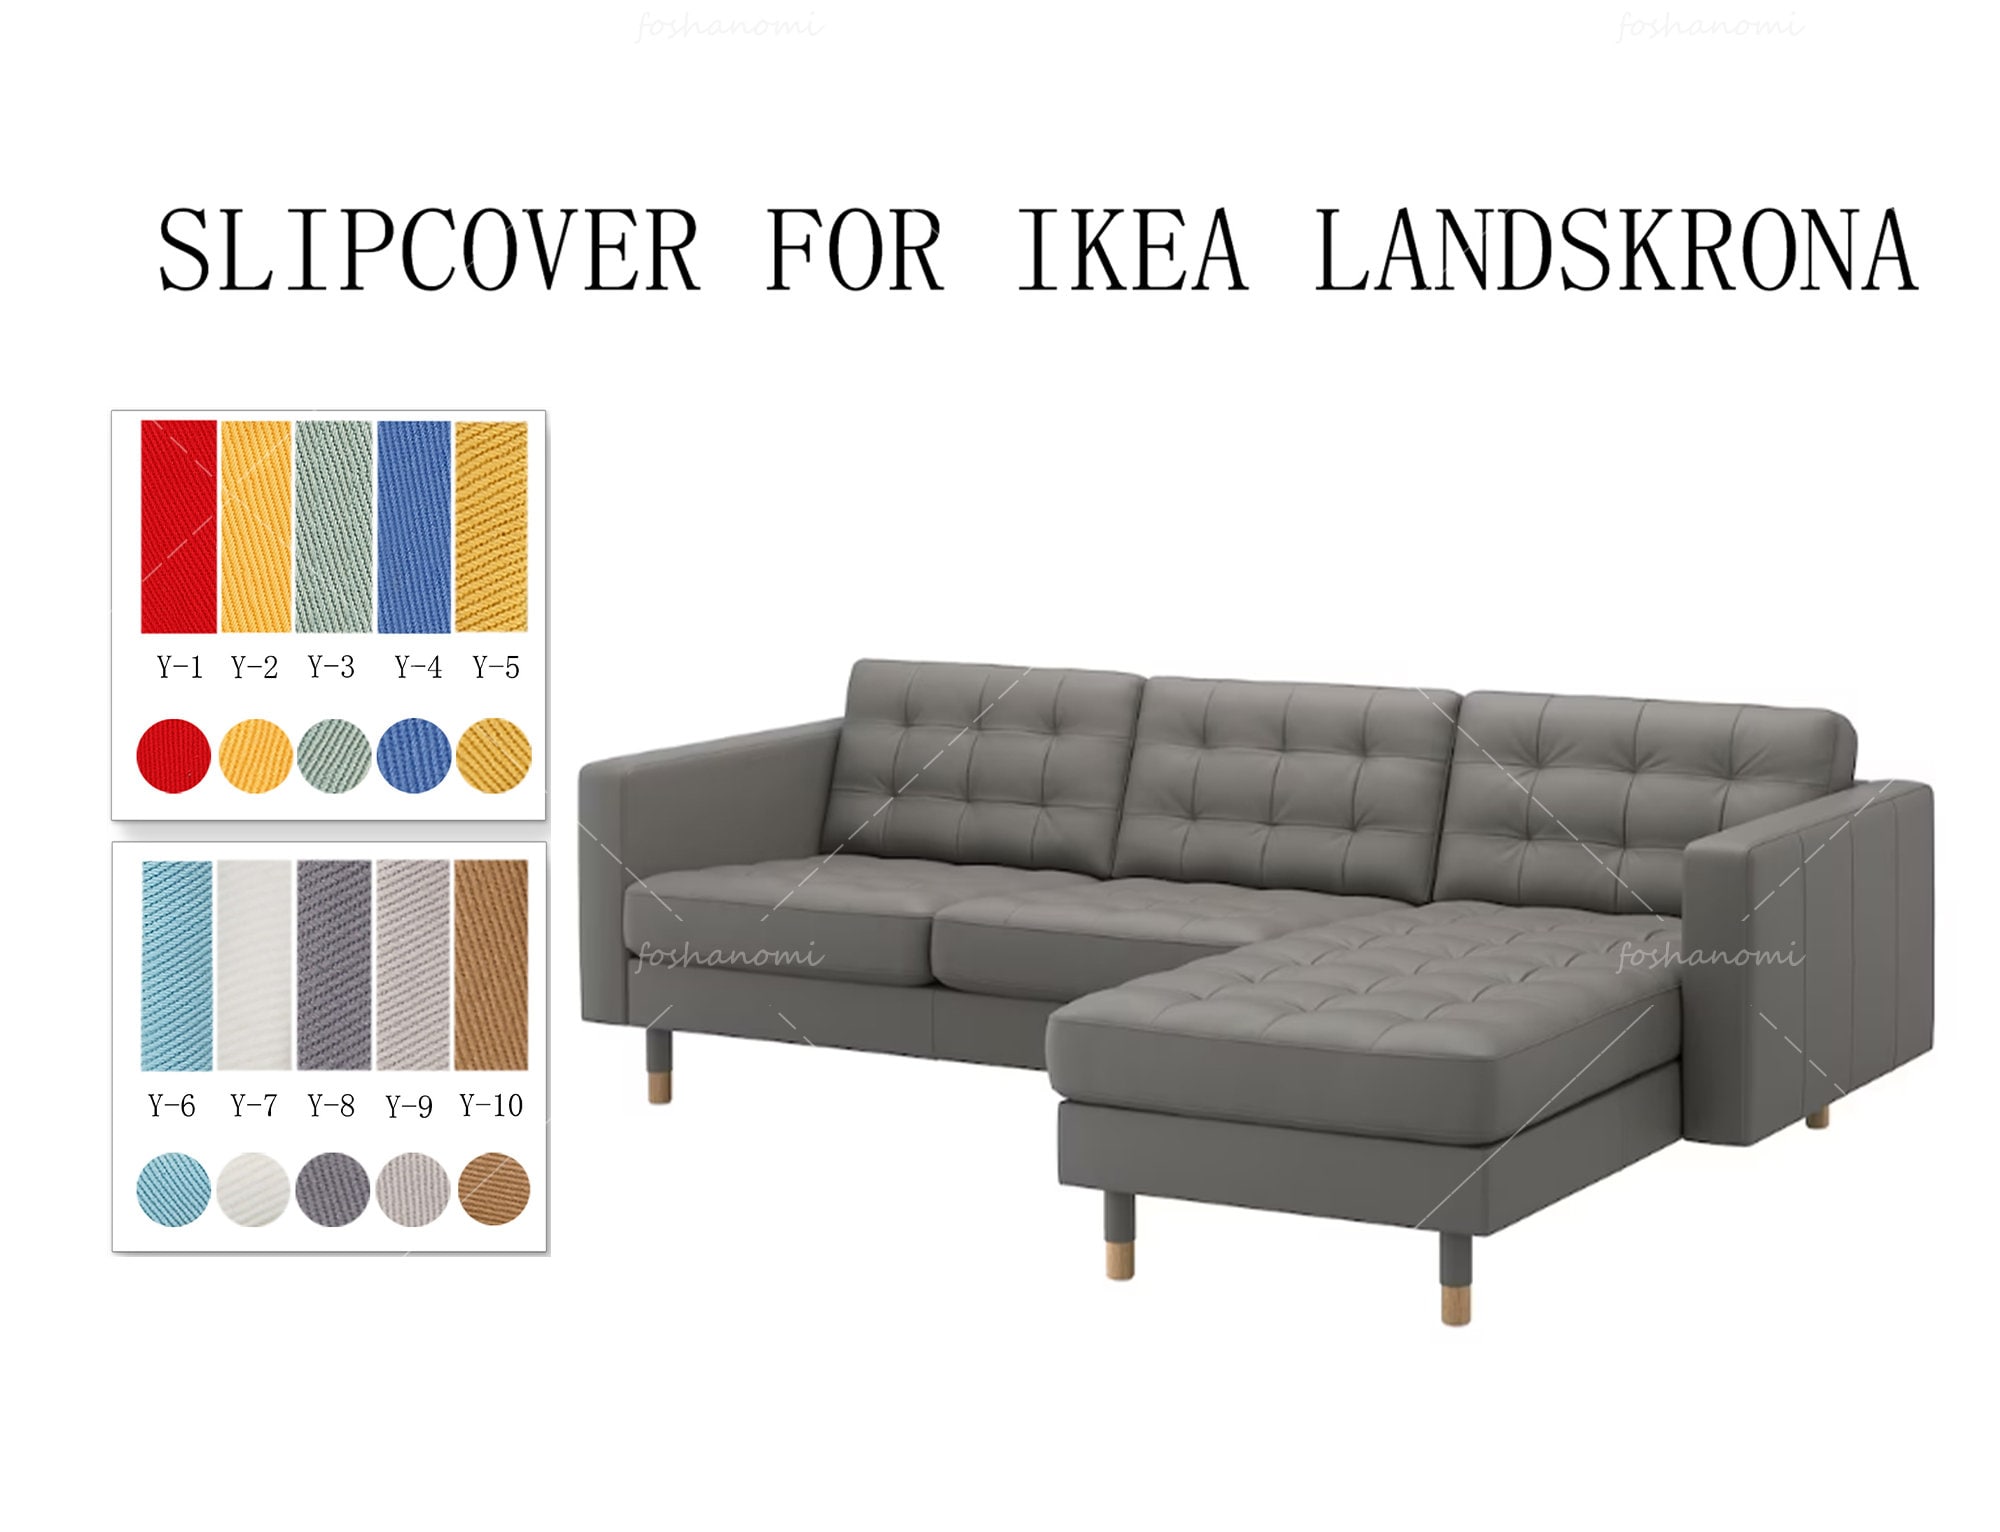 IKEA LANDSKRONA Sofa Cover3 Seat With Chaise/2seat1 - Etsy Finland